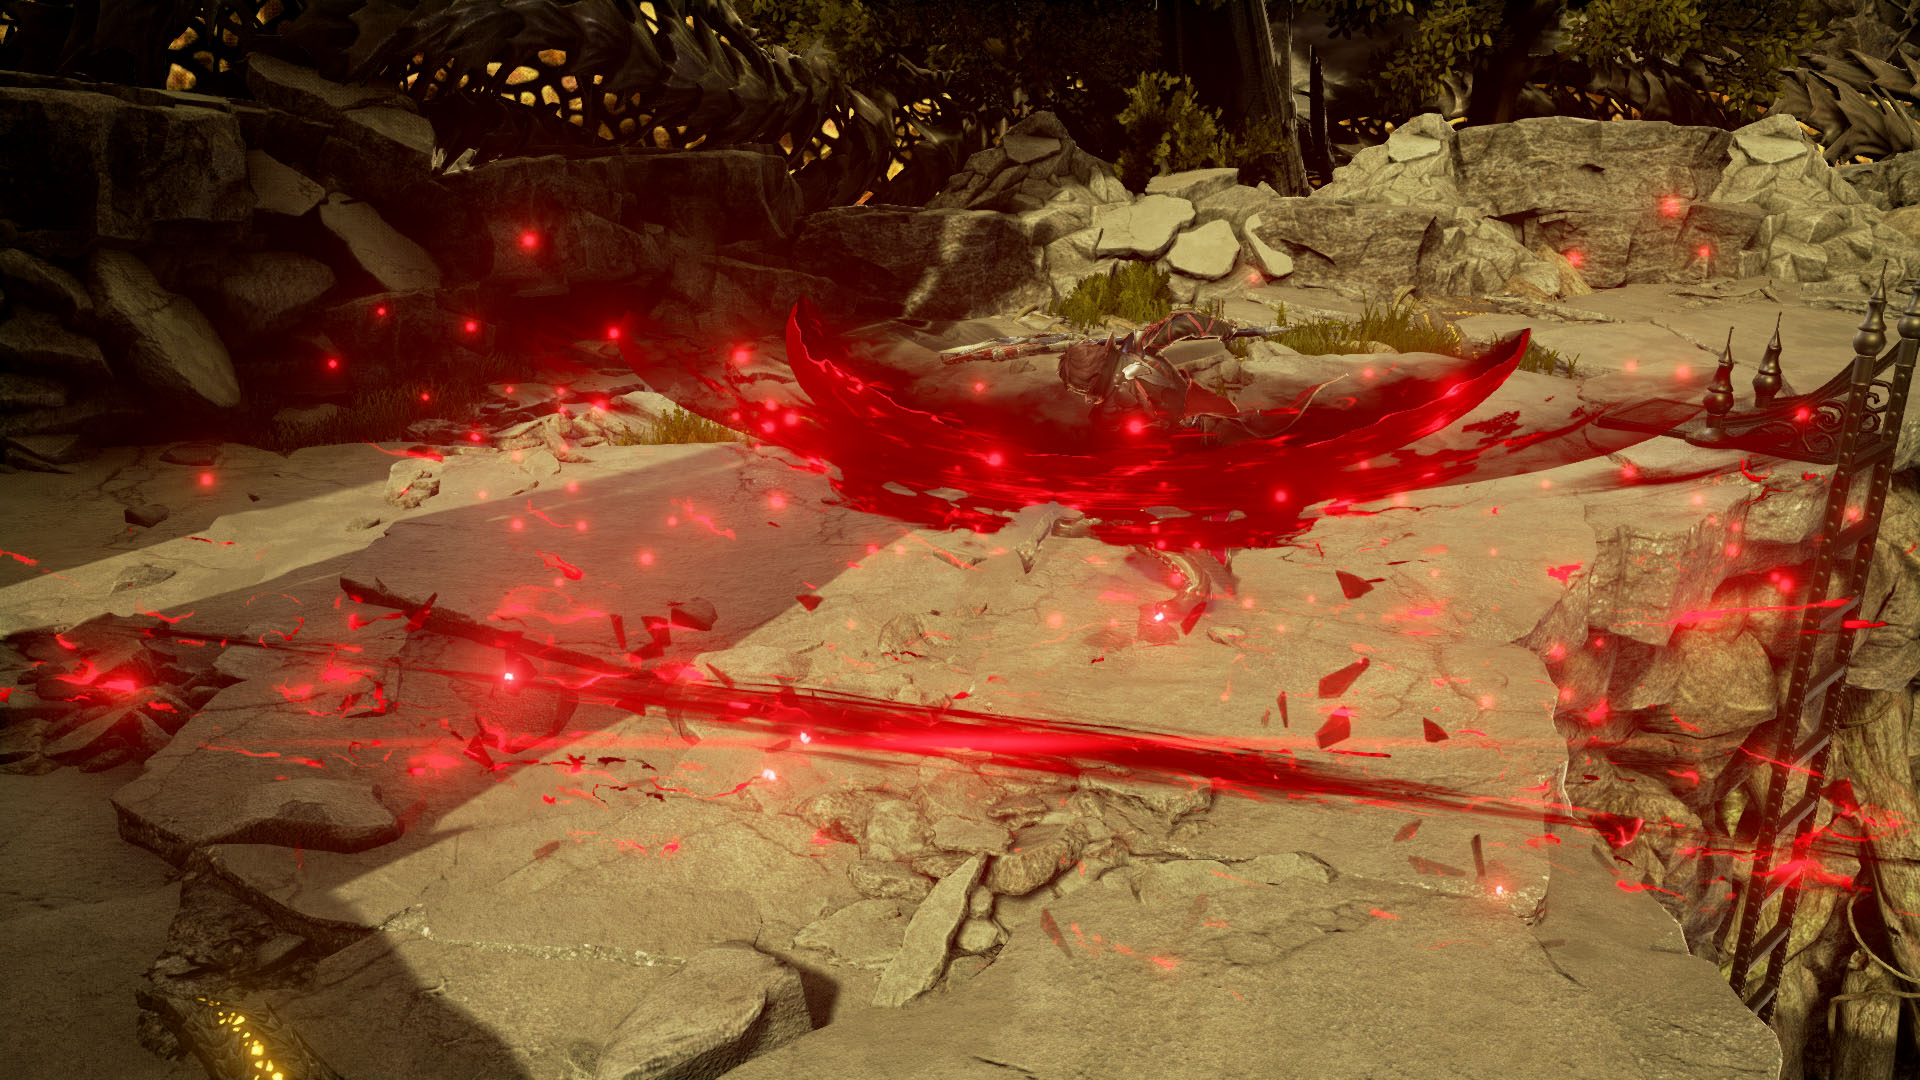 CODE VEIN: The ranged and melee weapon Bayonet shown in new Gameplay  Trailer - News - Gamesplanet.com